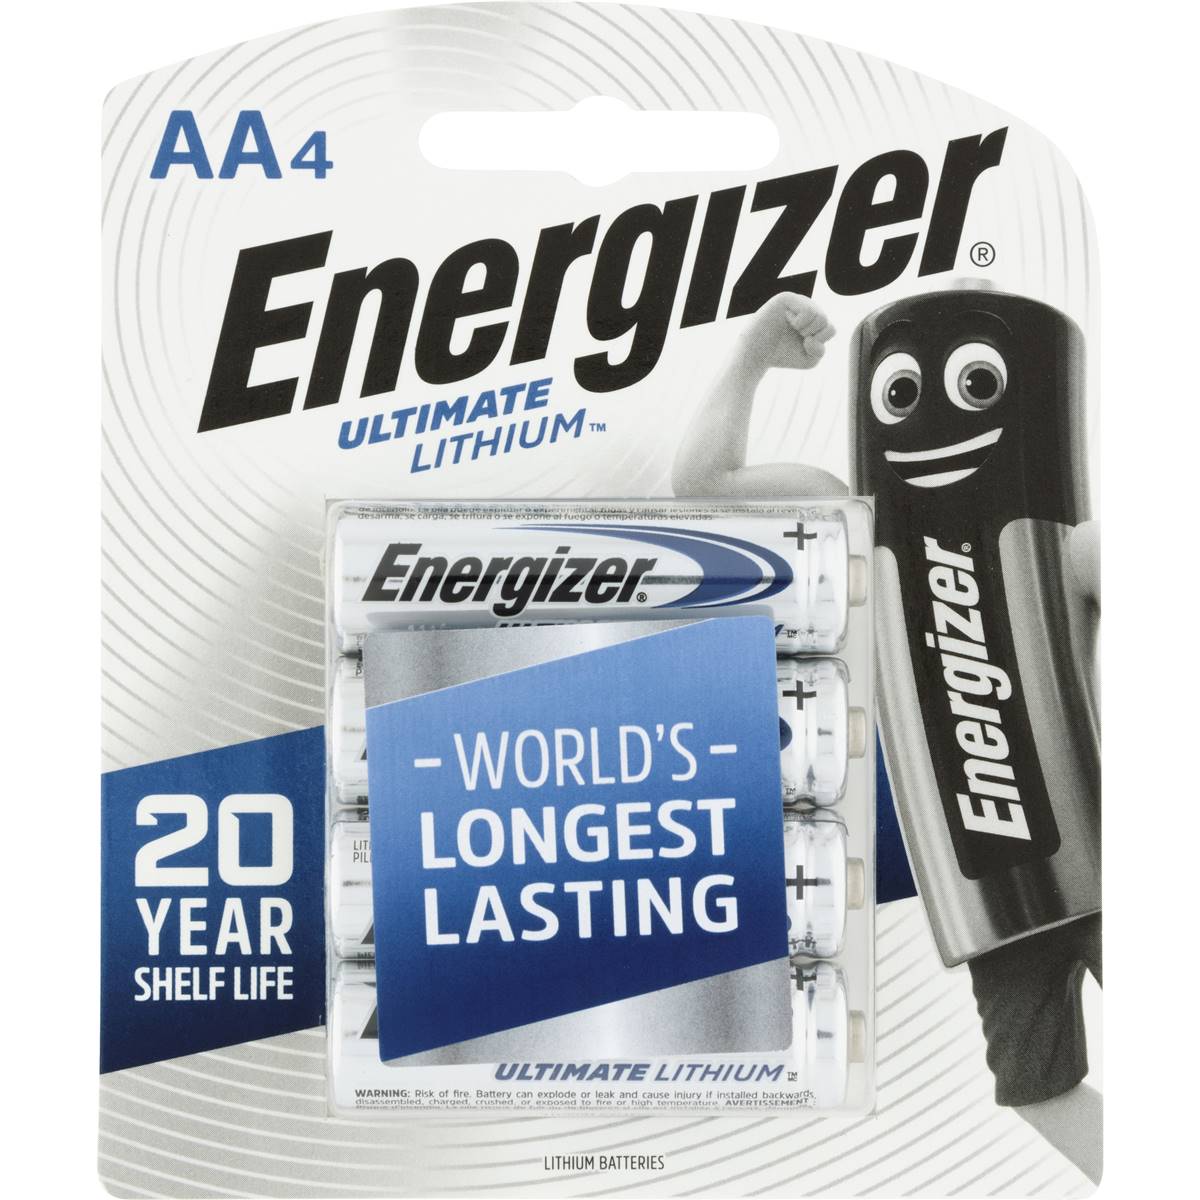 Energizer Lithium Ultimate Aa Batteries 4 Pack